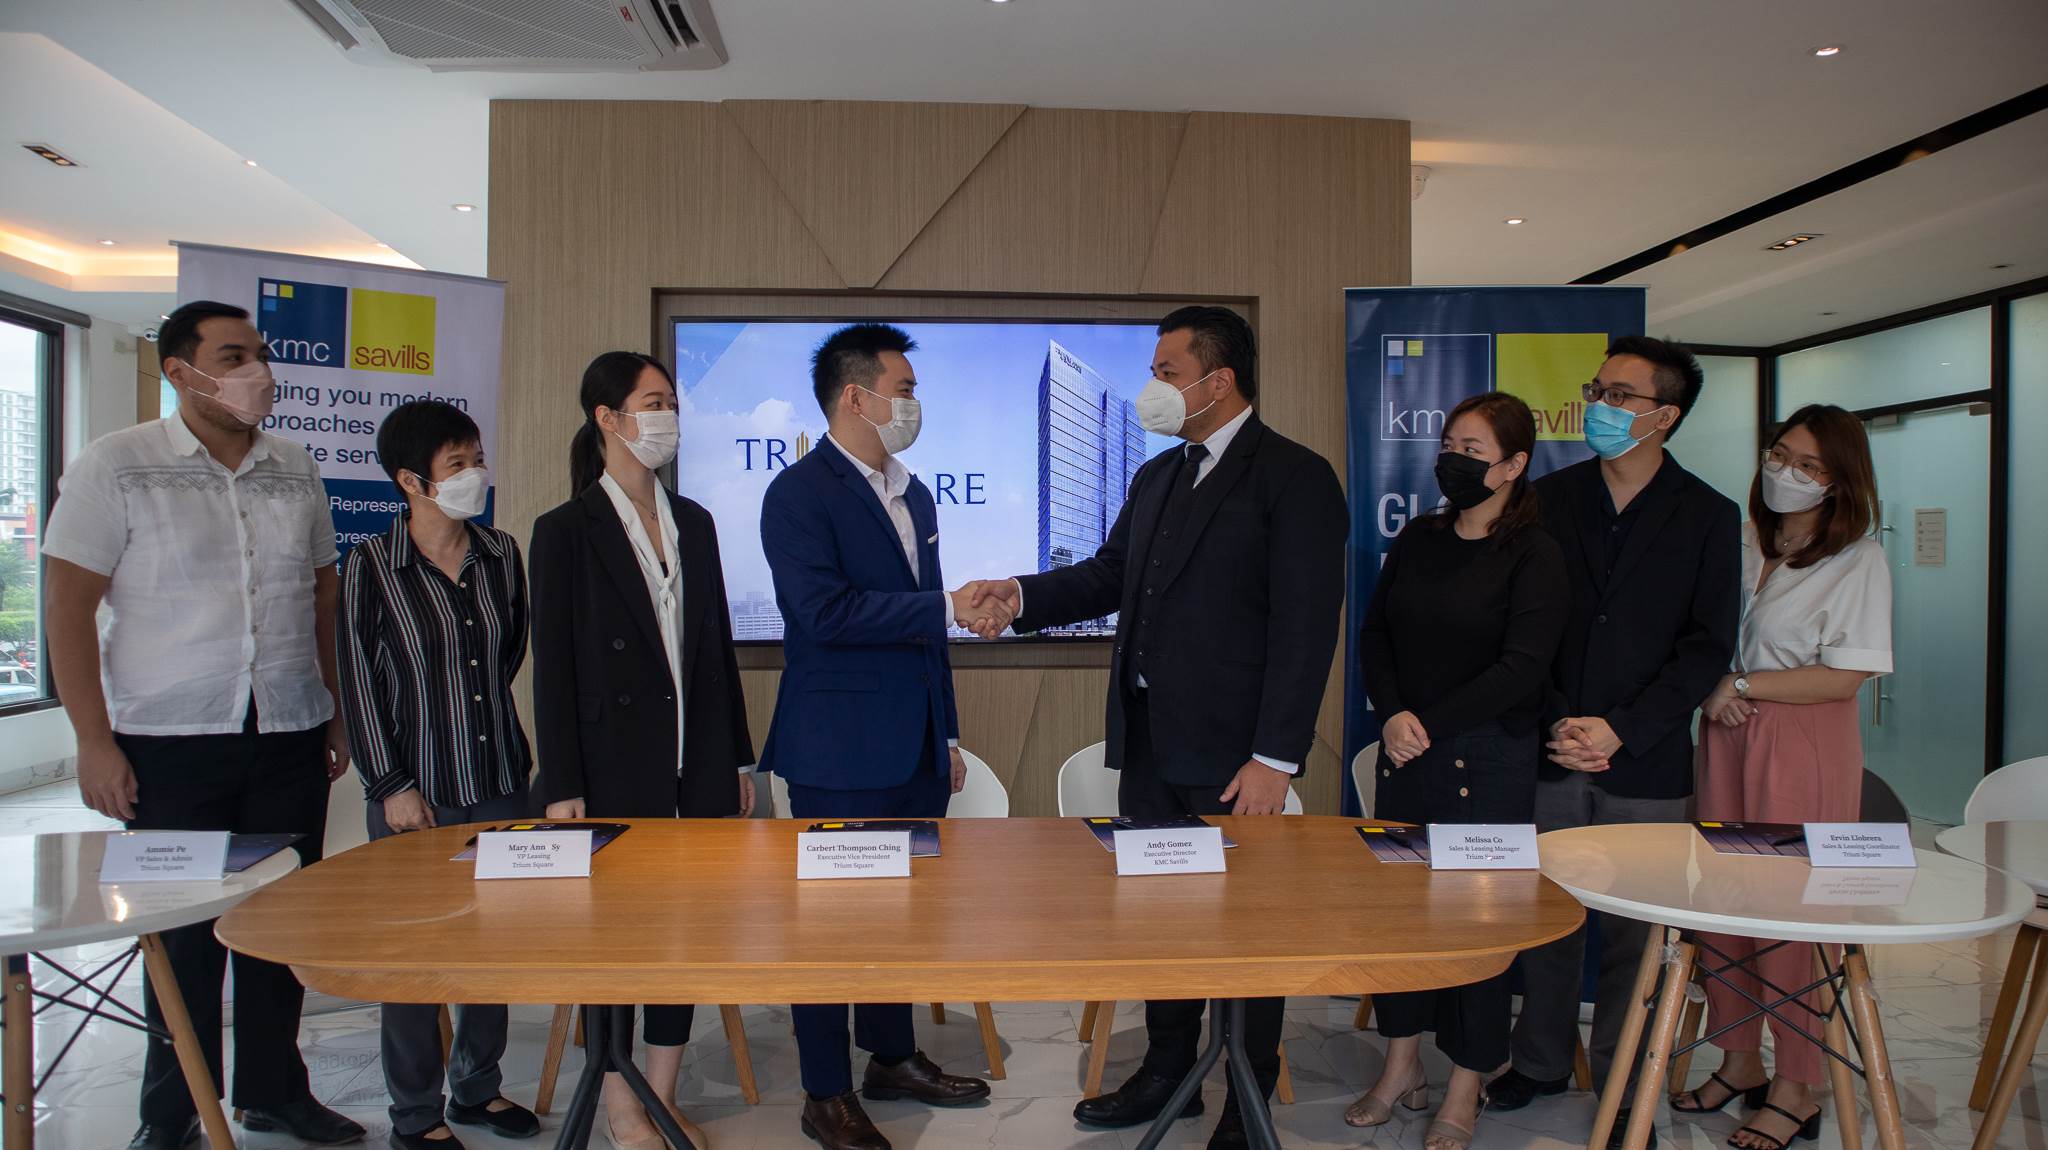 KMC Savills is appointed as Exclusive Leasing Agent for Trium Square